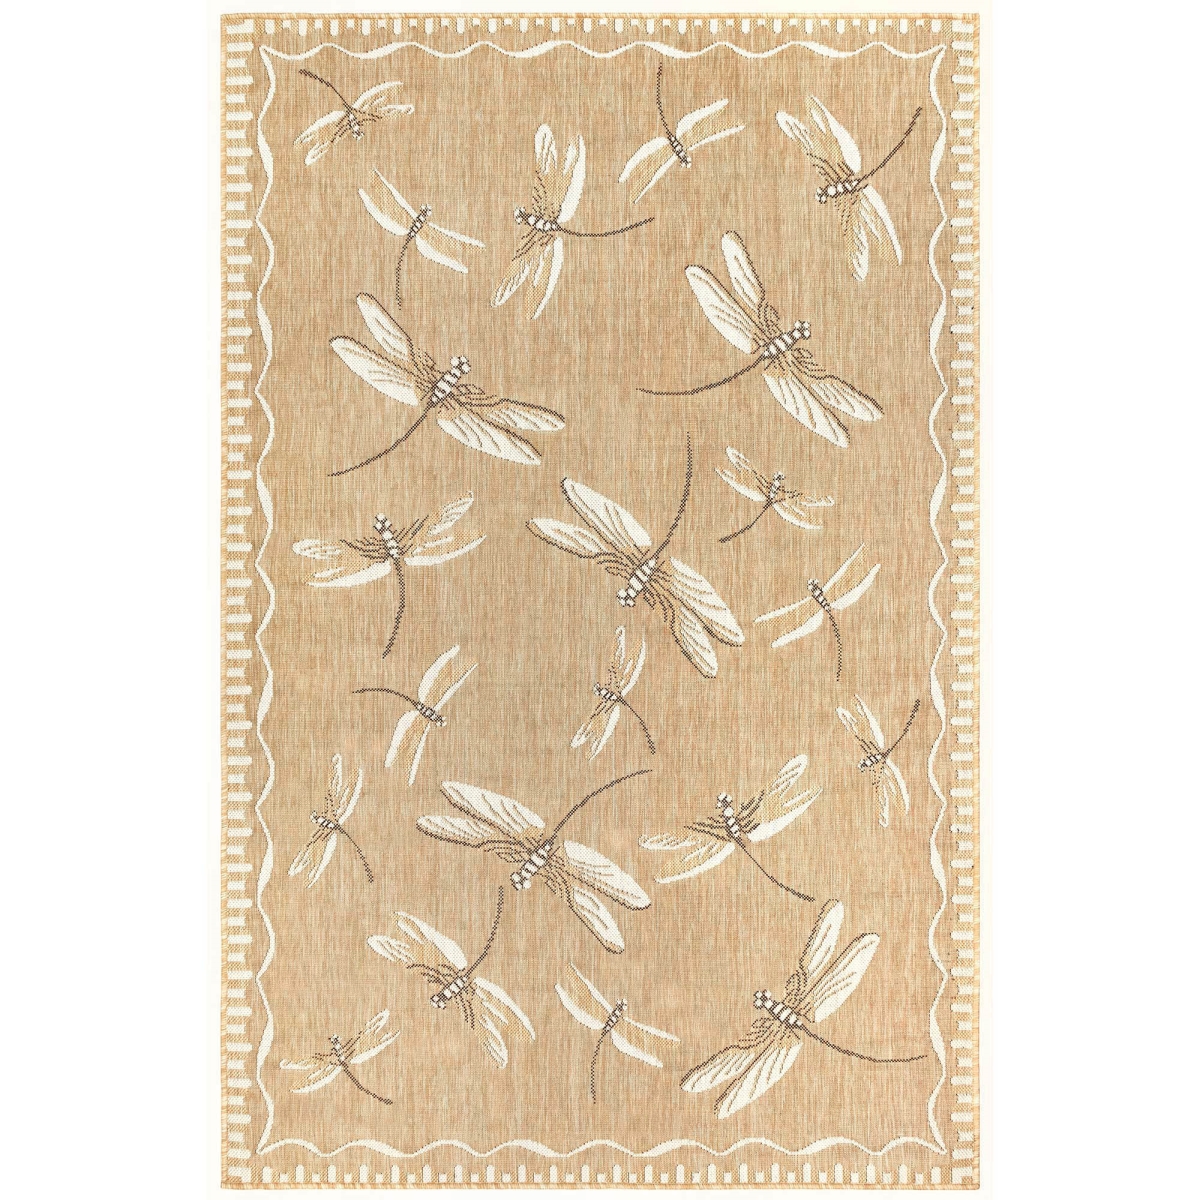 Trans-ocean Imports Cre58844022 Liora Manne Carmel Dragonfly Indoor & Outdoor Rug, Dark Sand - 4 Ft. 10 In. X 7 Ft. 6 In.